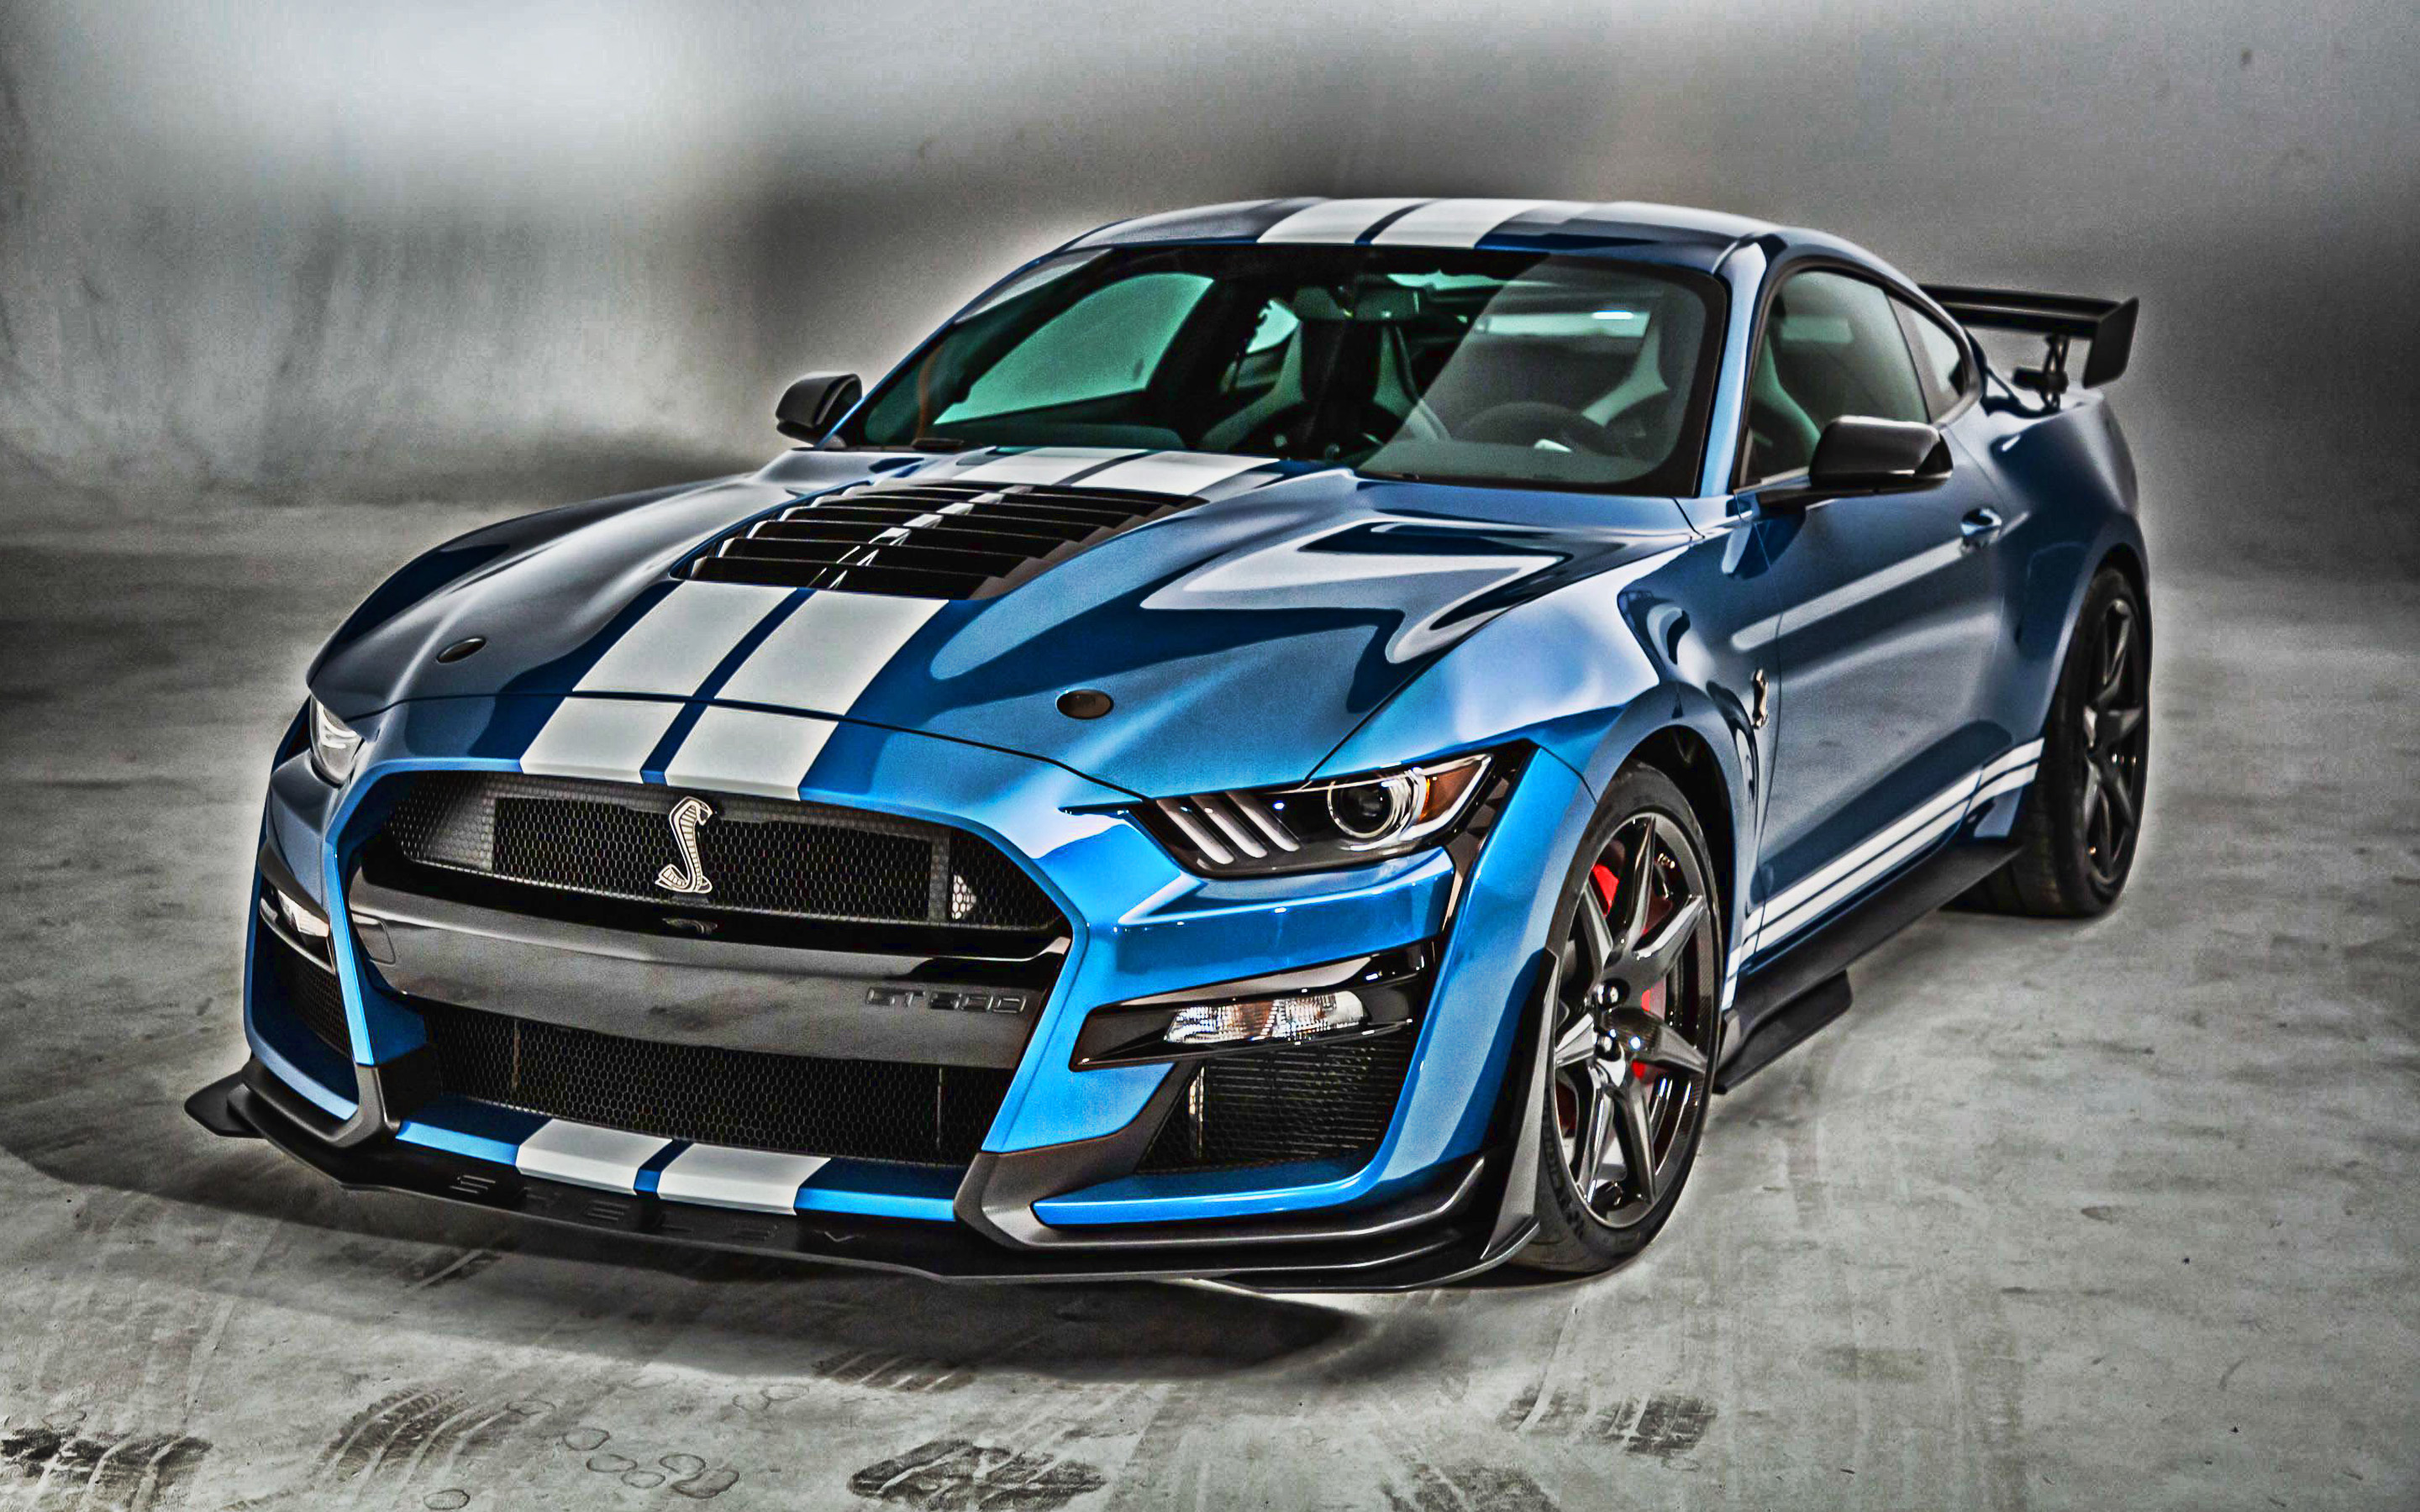 Download wallpaper Mustang Shelby GT blue sports